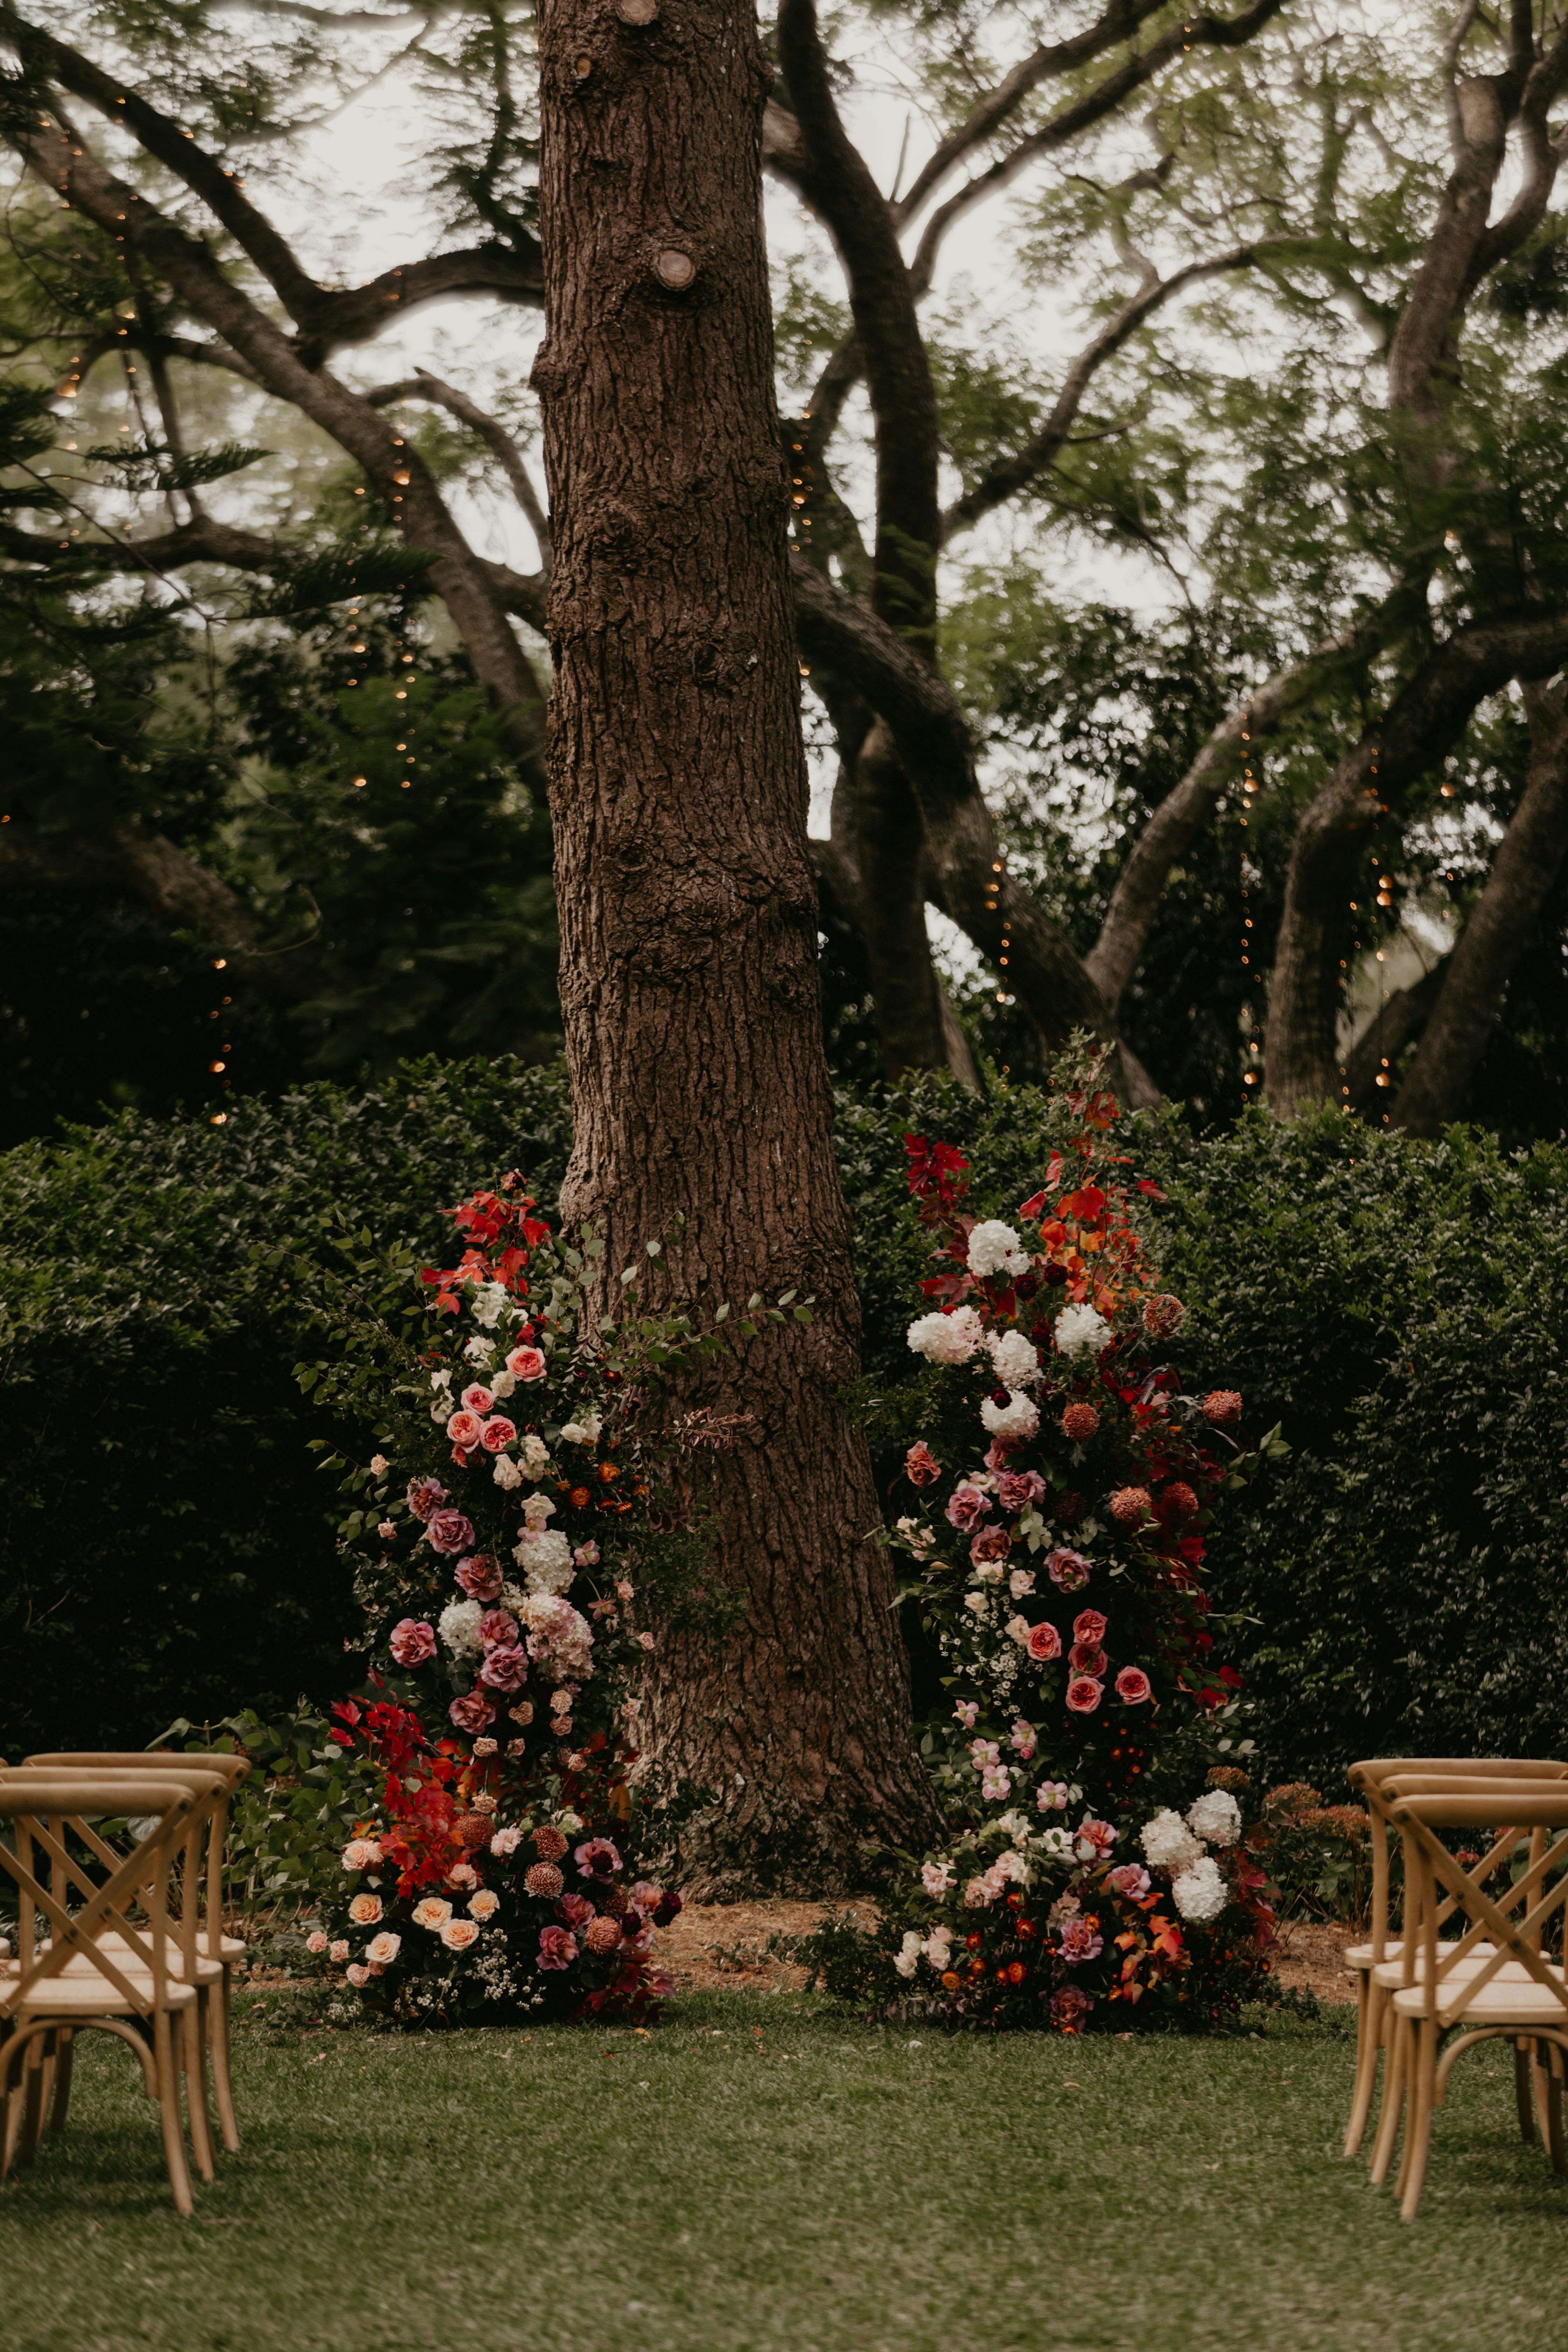 Floral arbour with red flowers